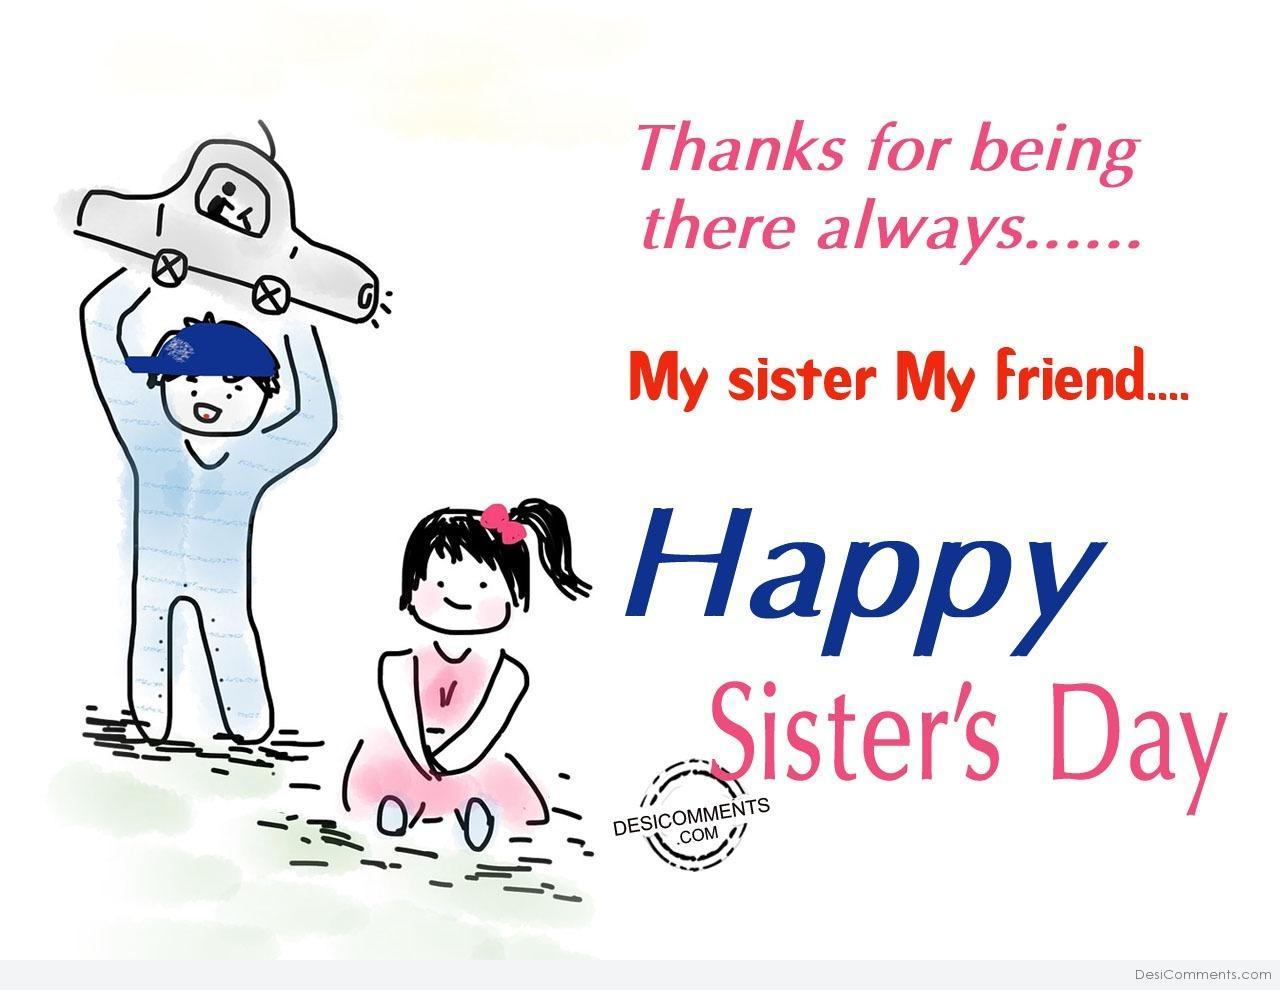 Sister's Day Picture, Image, Graphics